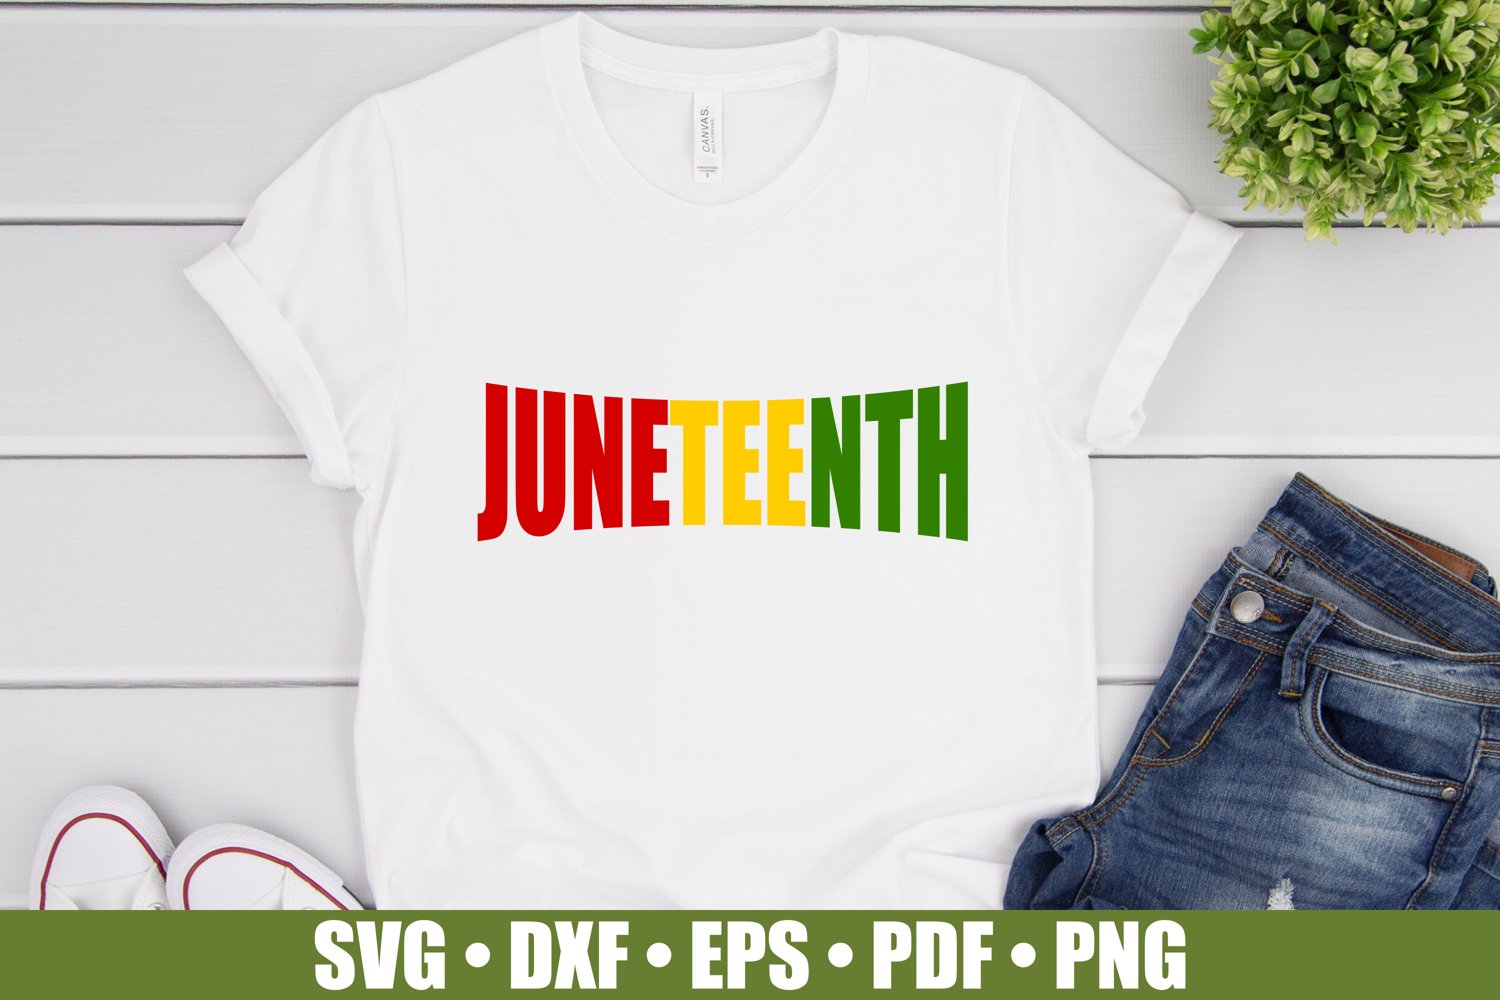 T-shirt design in red, yellow and green colors.